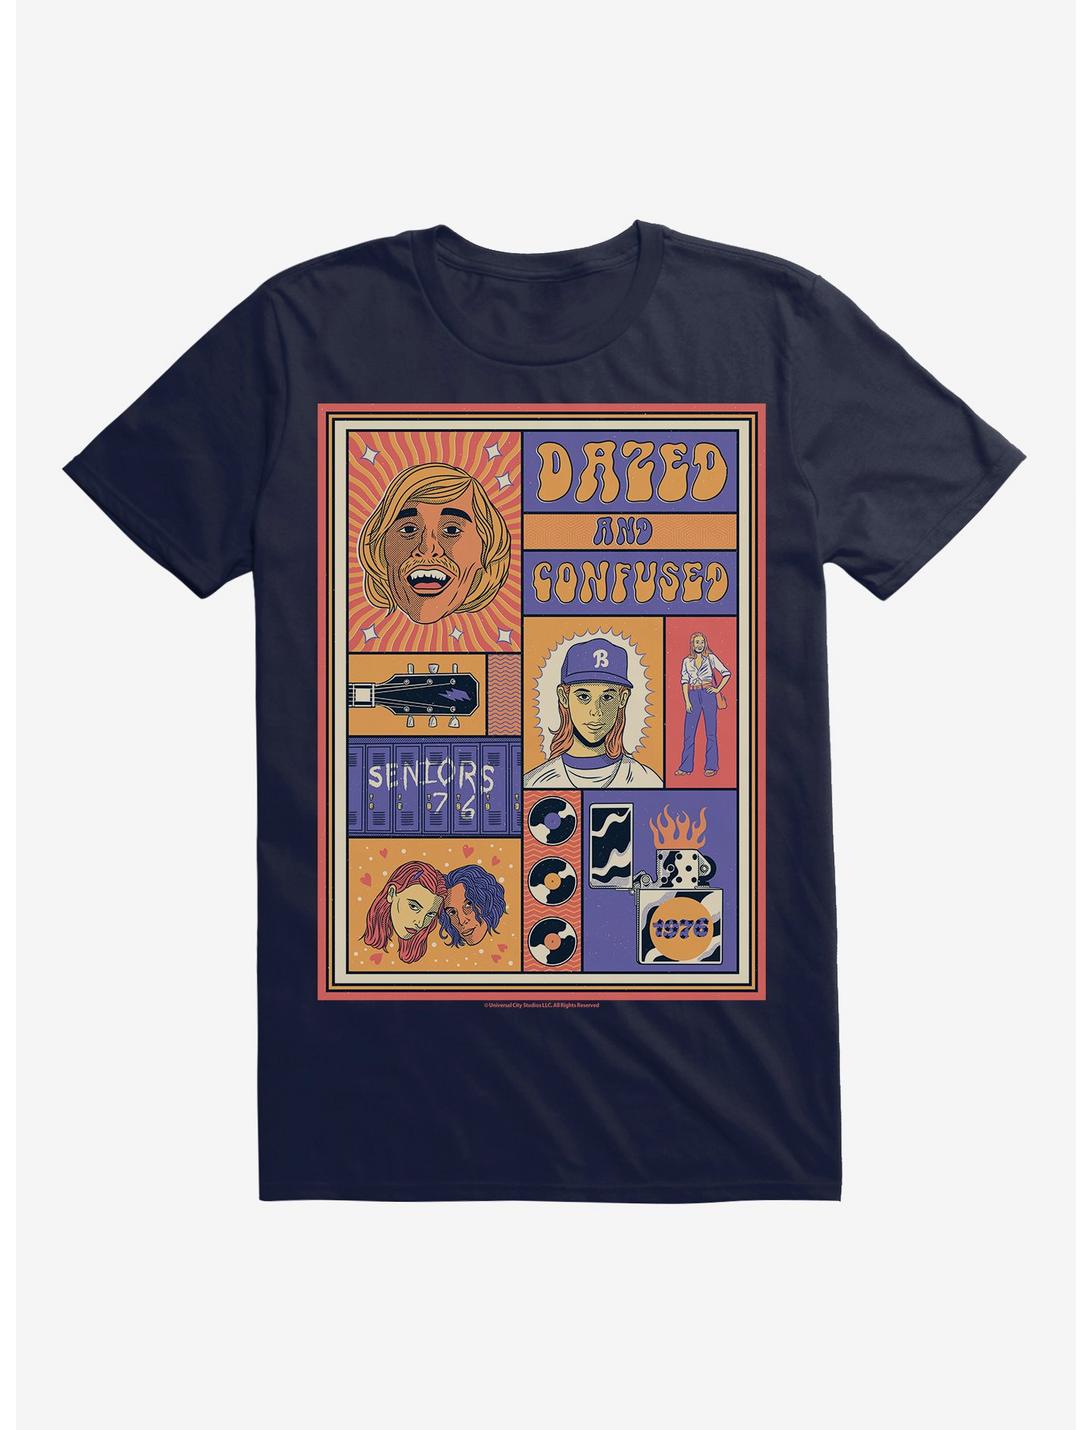 Dazed and Confused Collage T-Shirt, NAVY, hi-res